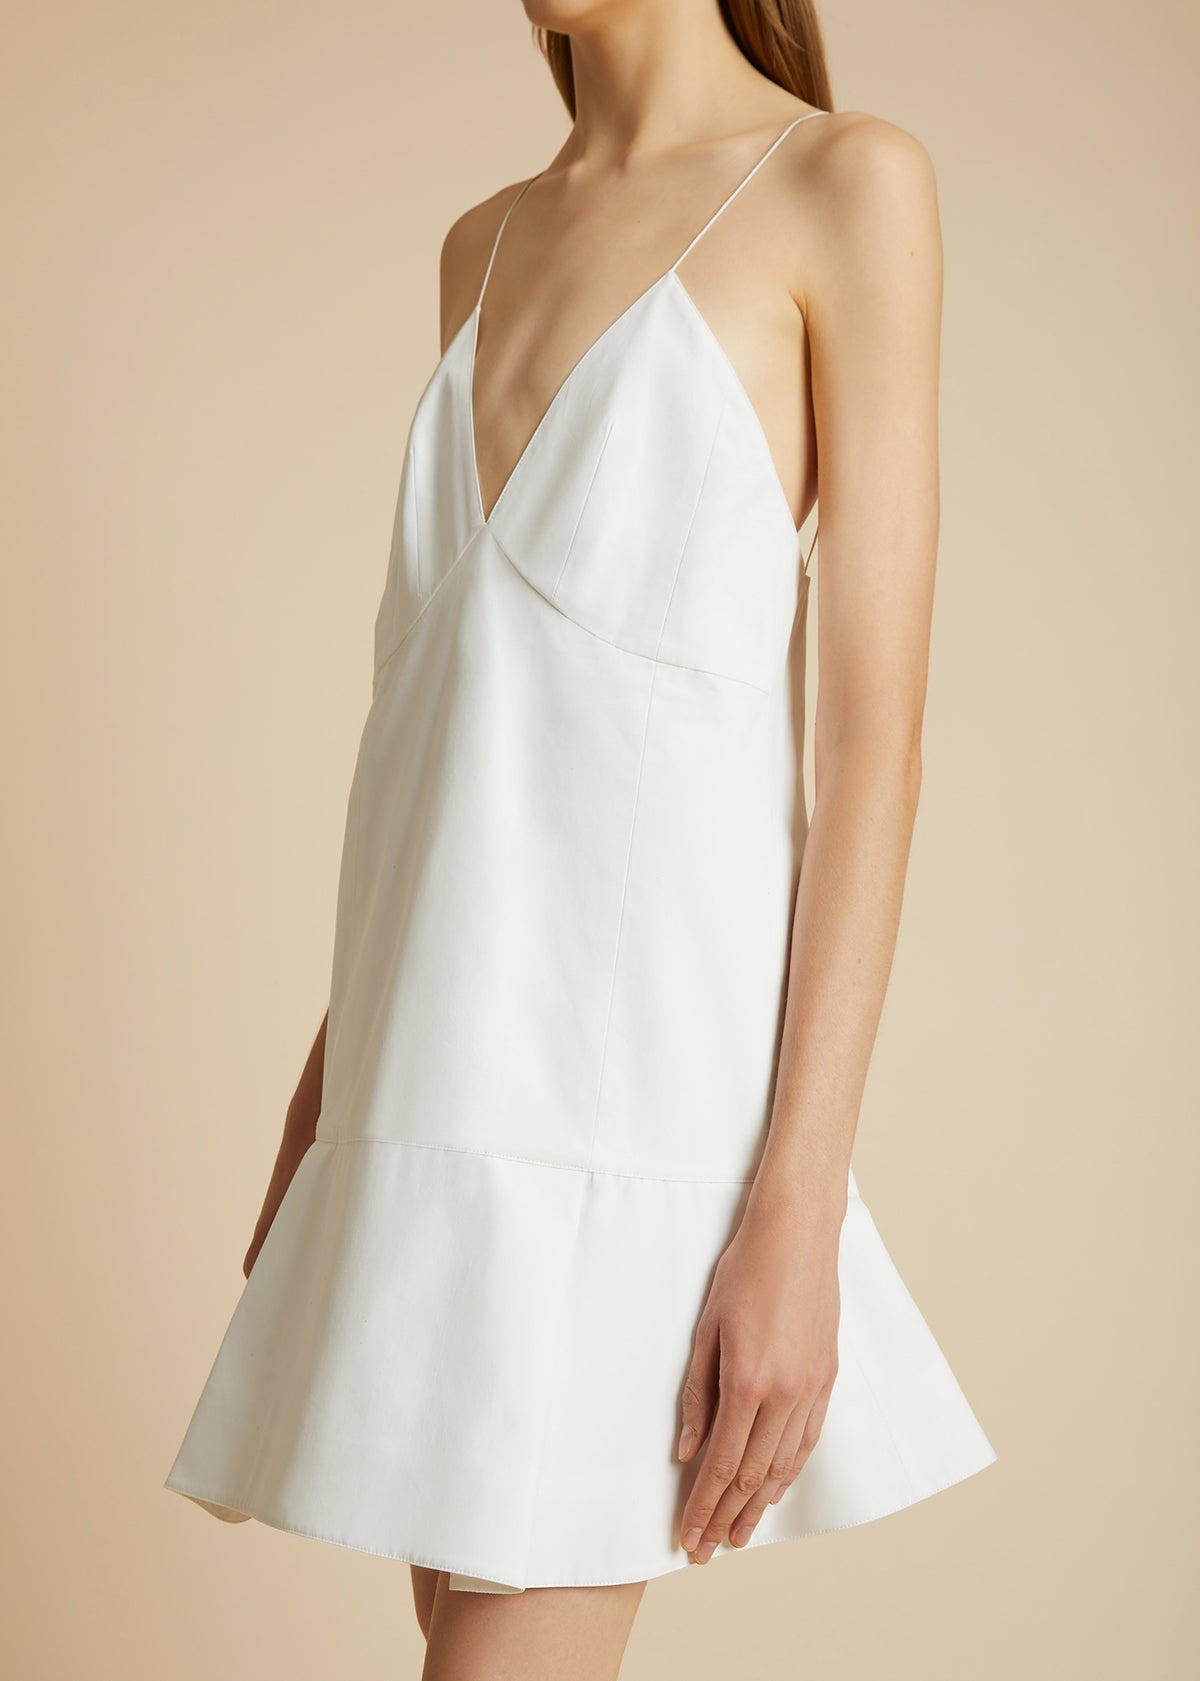 The Archie Dress in White - 4